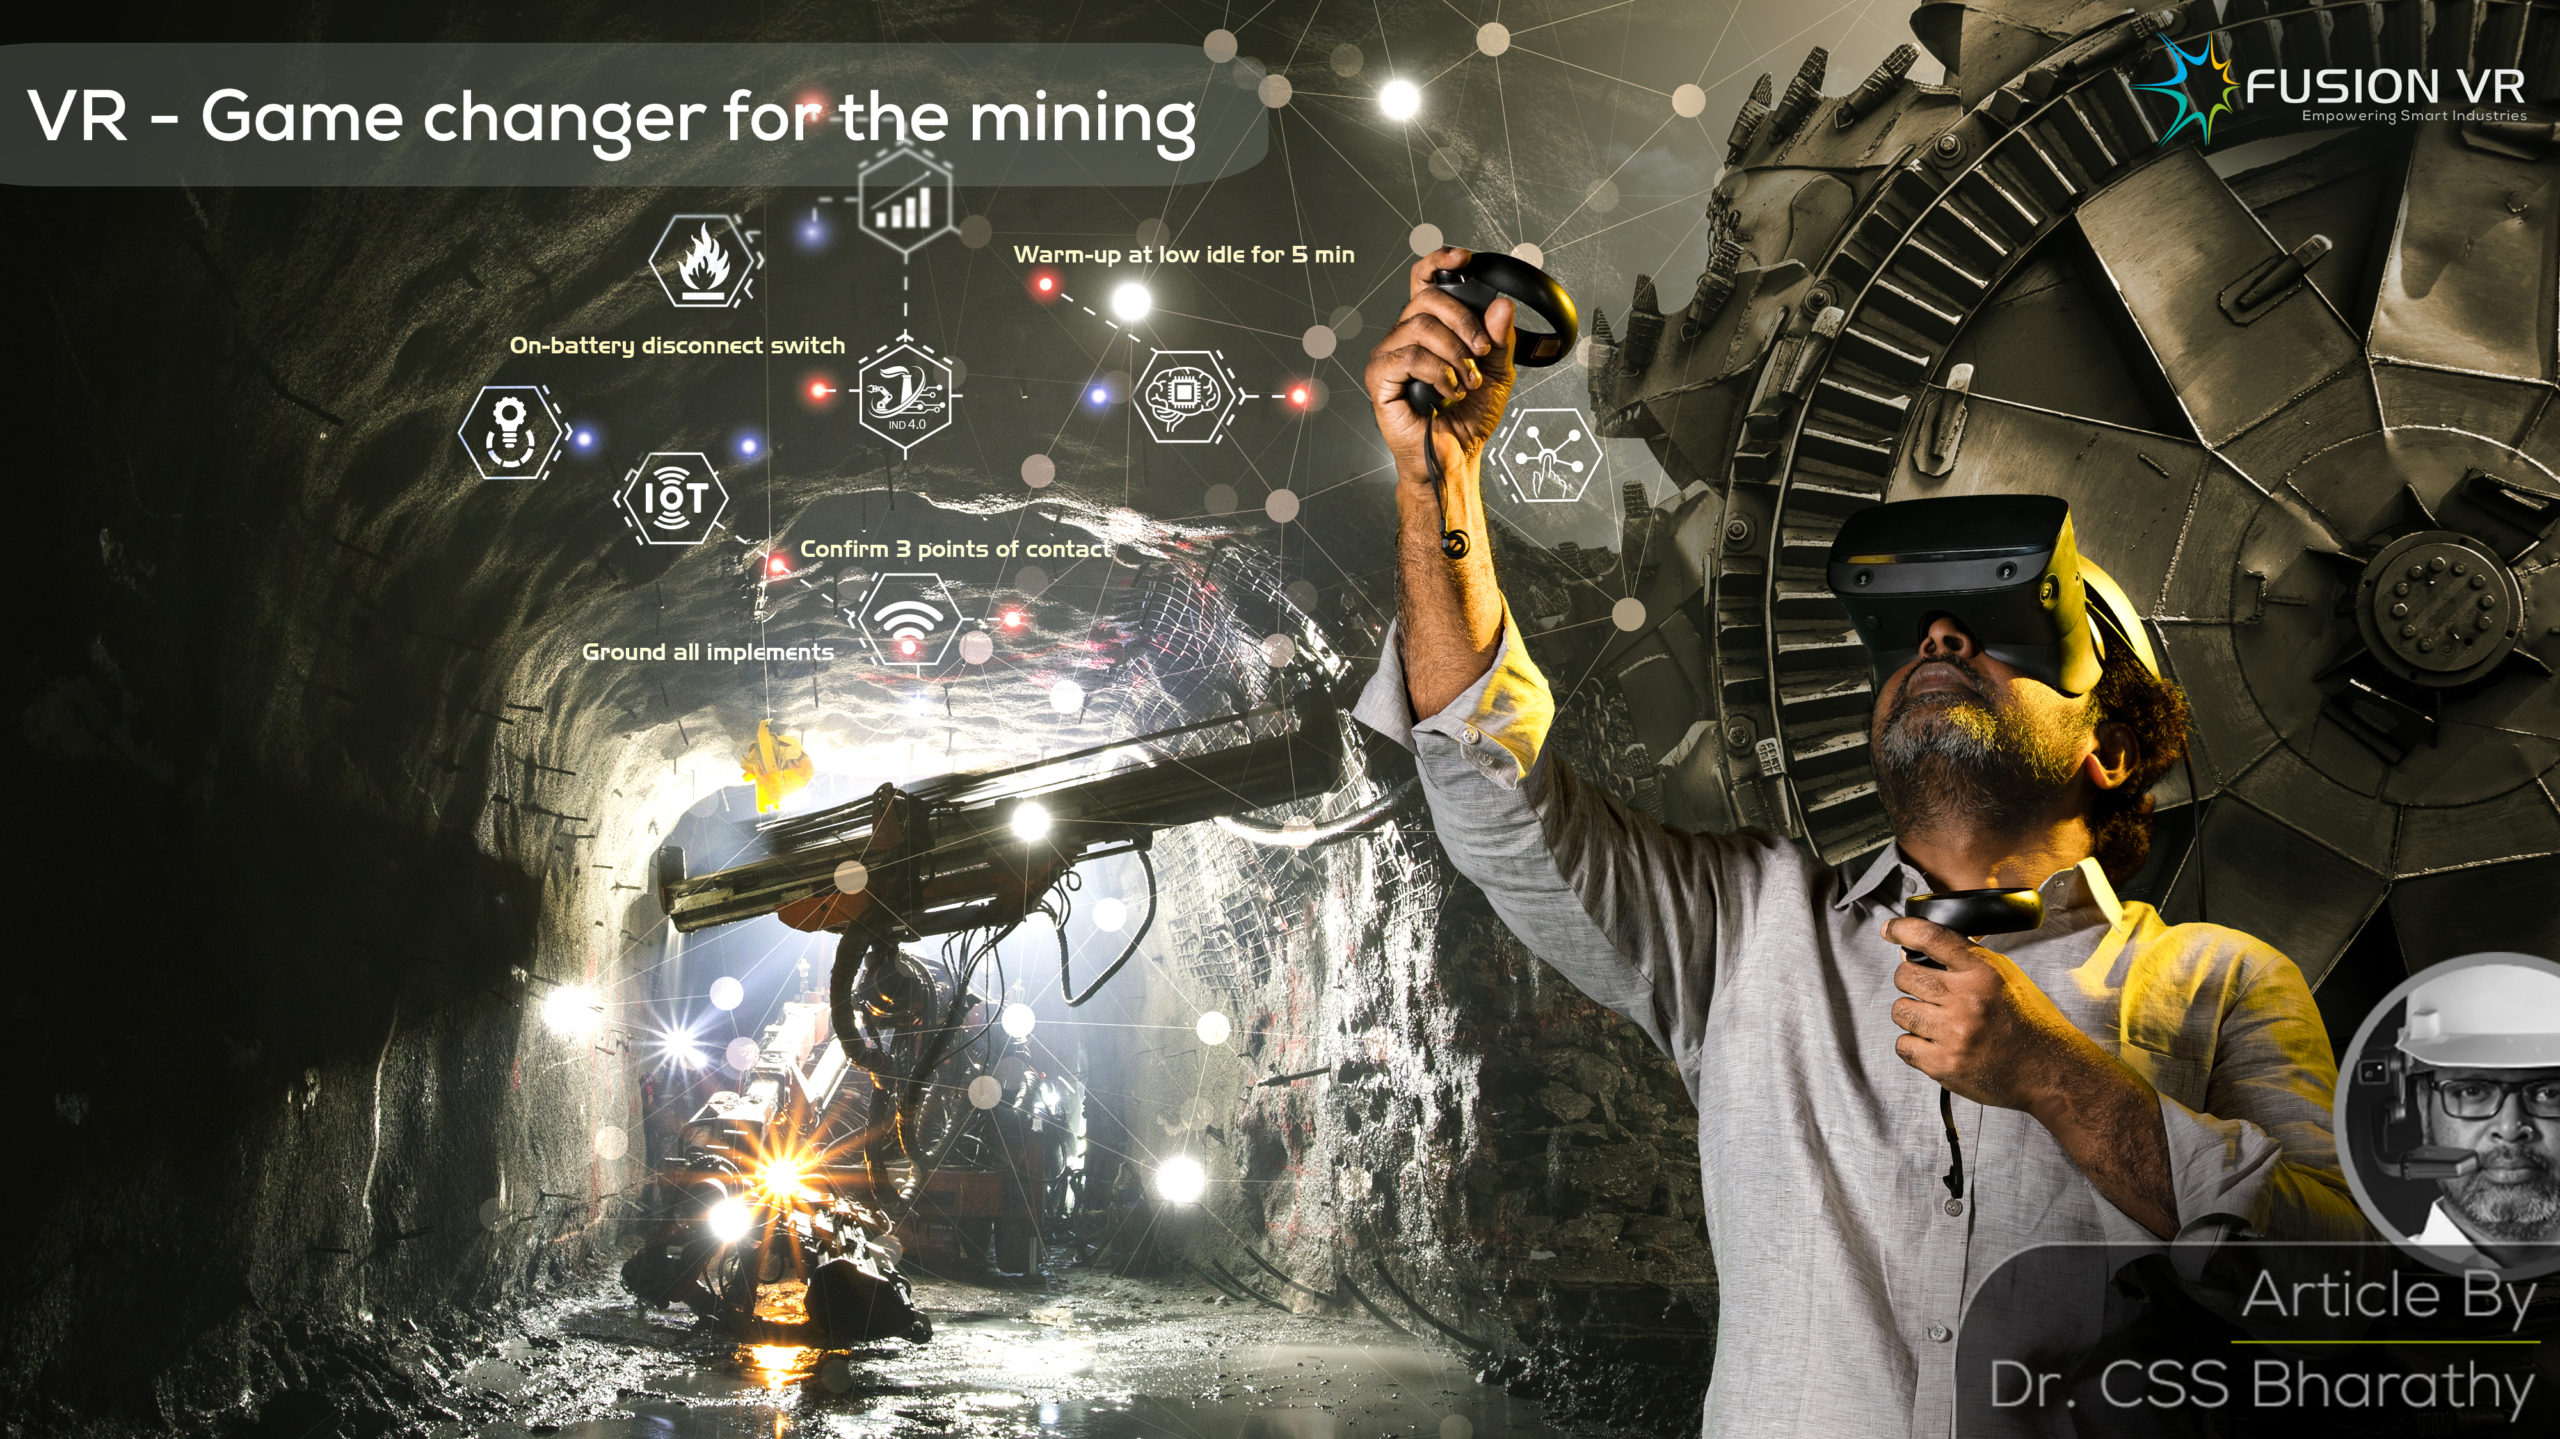 Virtual Reality is a Game Changer for the Mining Industry